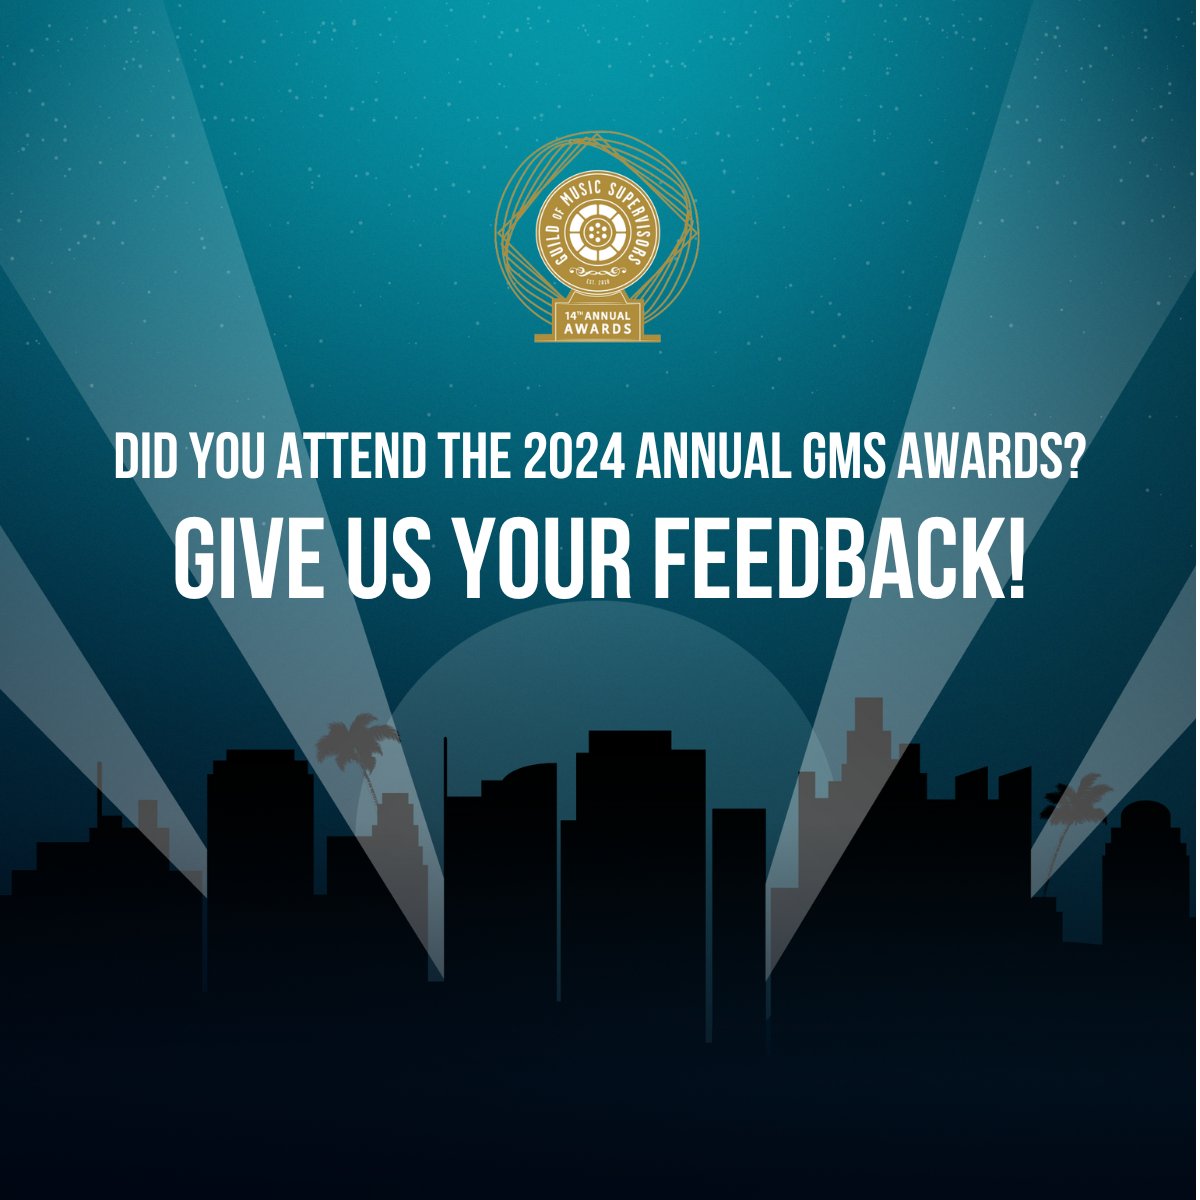 Did you attend this year's GMS Awards? We would love your feedback! forms.gle/tJkVgsMwSNDT2B…